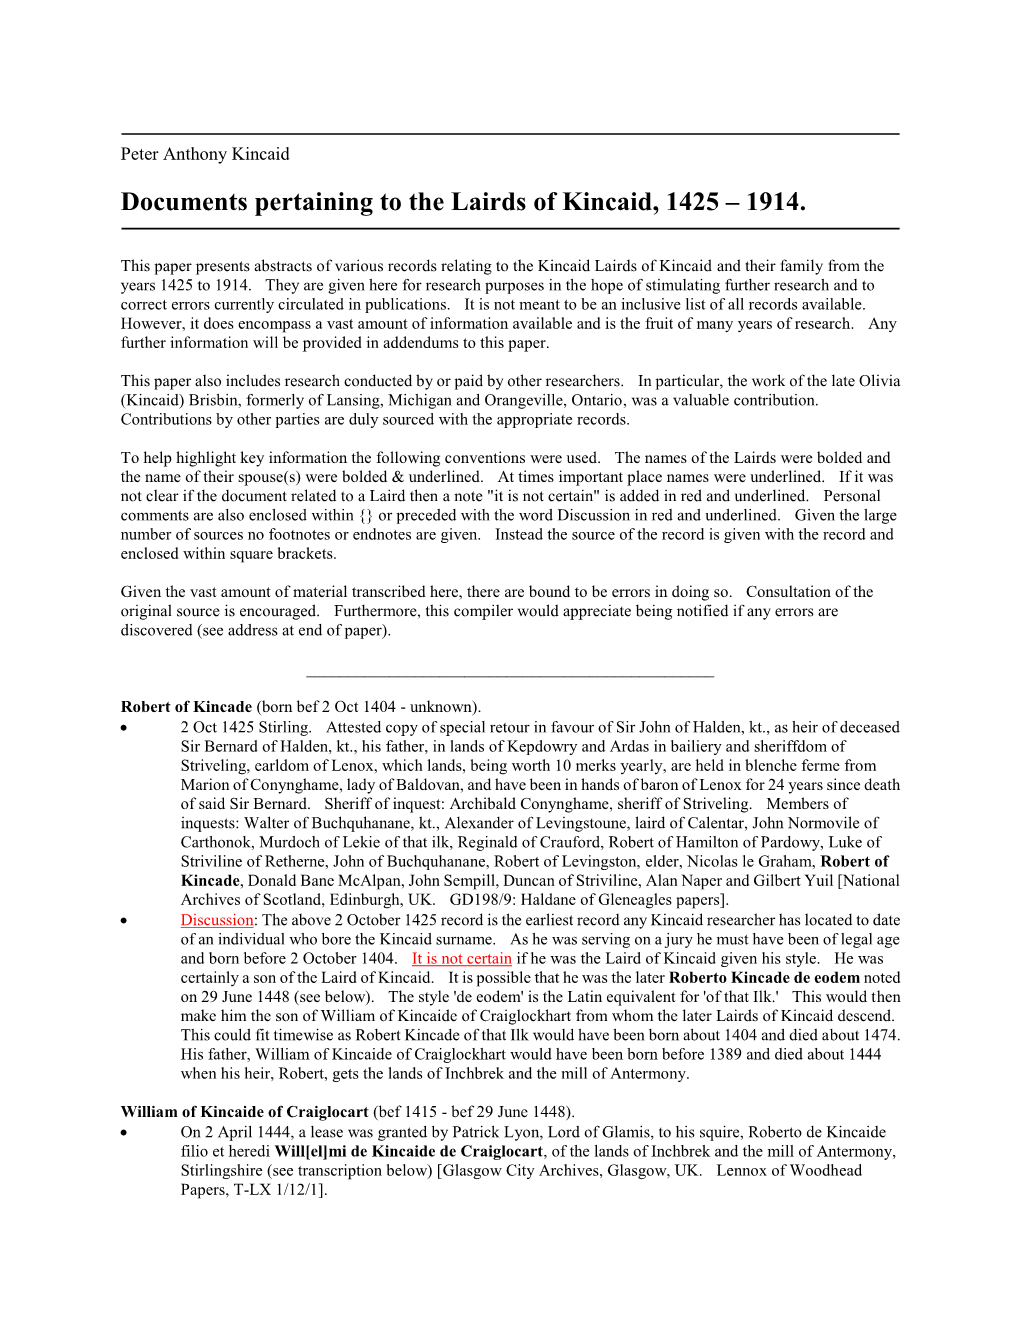 Documents Pertaining to the Lairds of Kincaid, 1425 – 1914